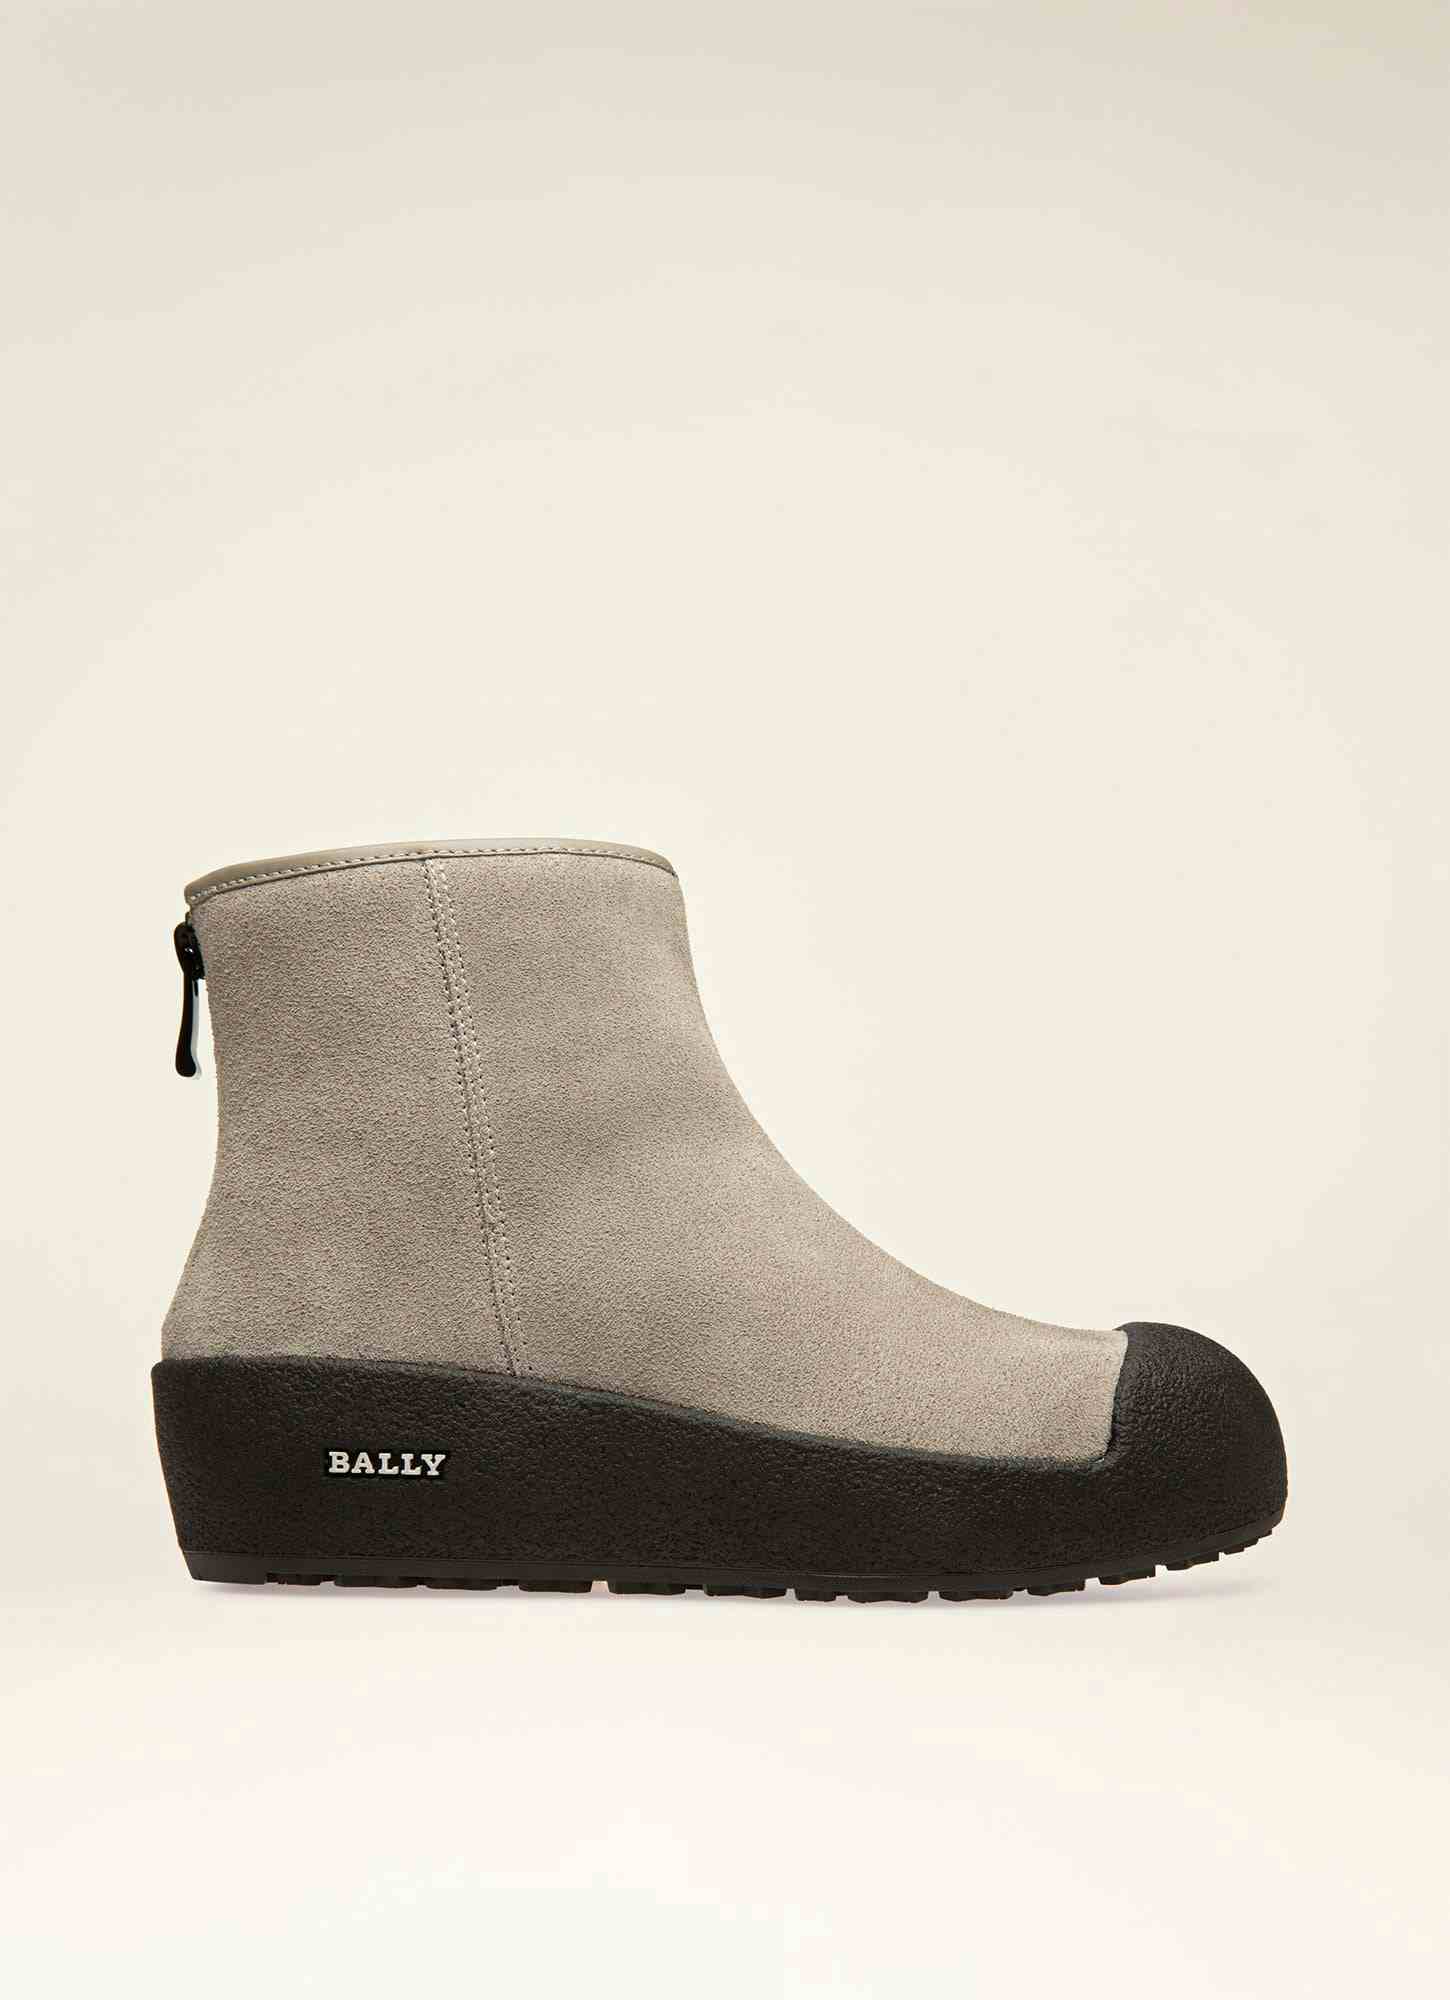 BALLY CURLING Leather Boots In Grey - Women's - Bally